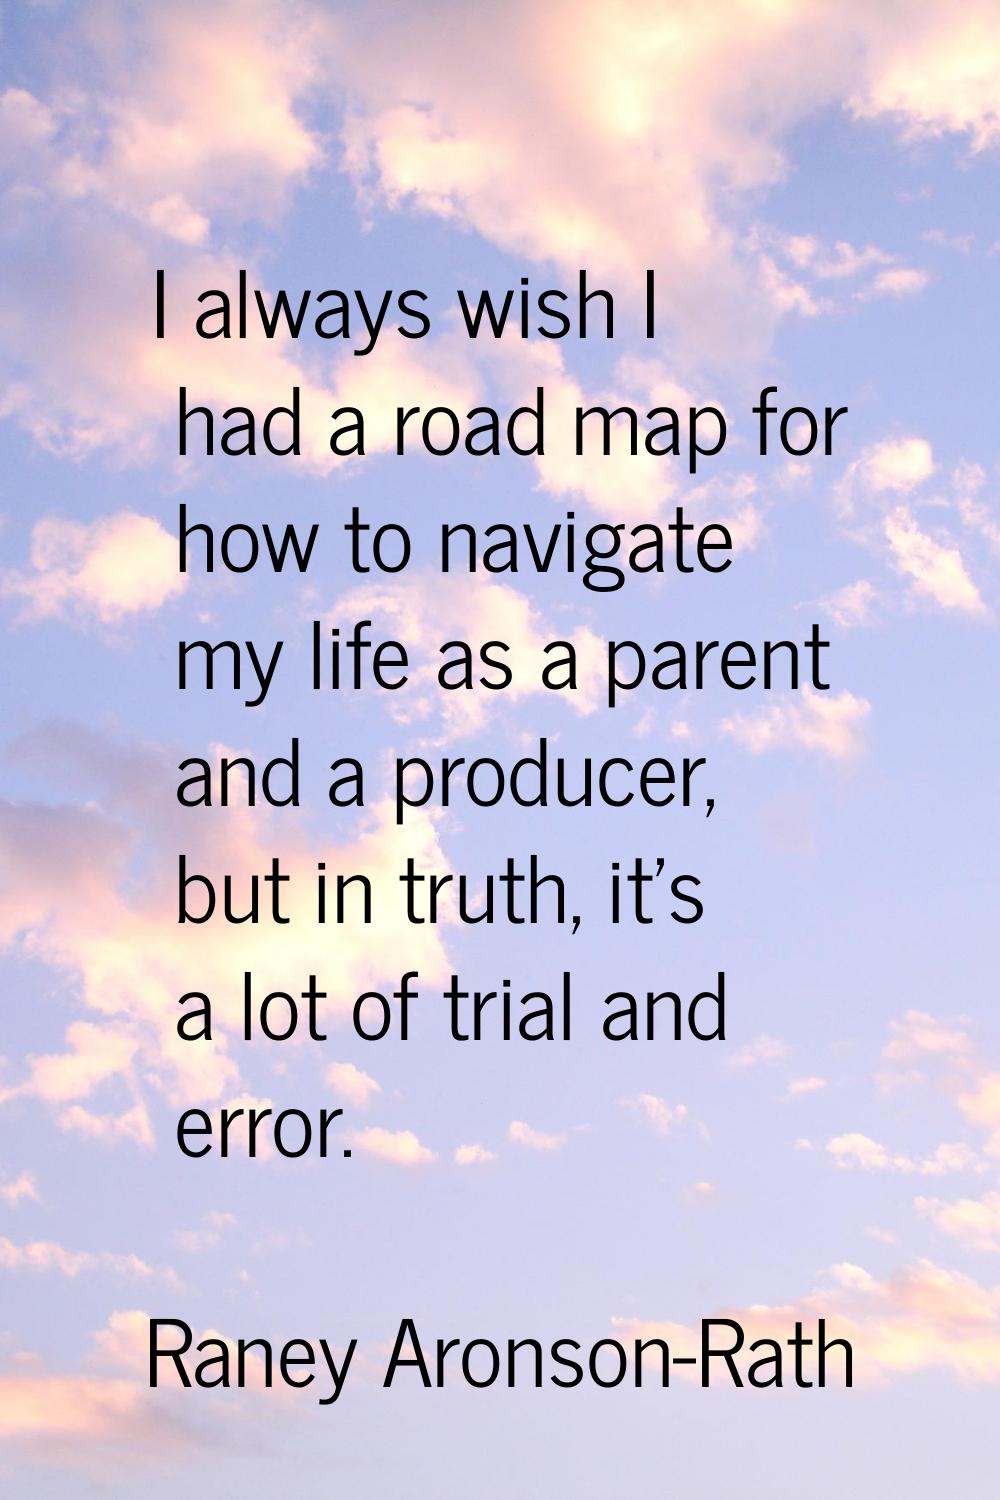 I always wish I had a road map for how to navigate my life as a parent and a producer, but in truth